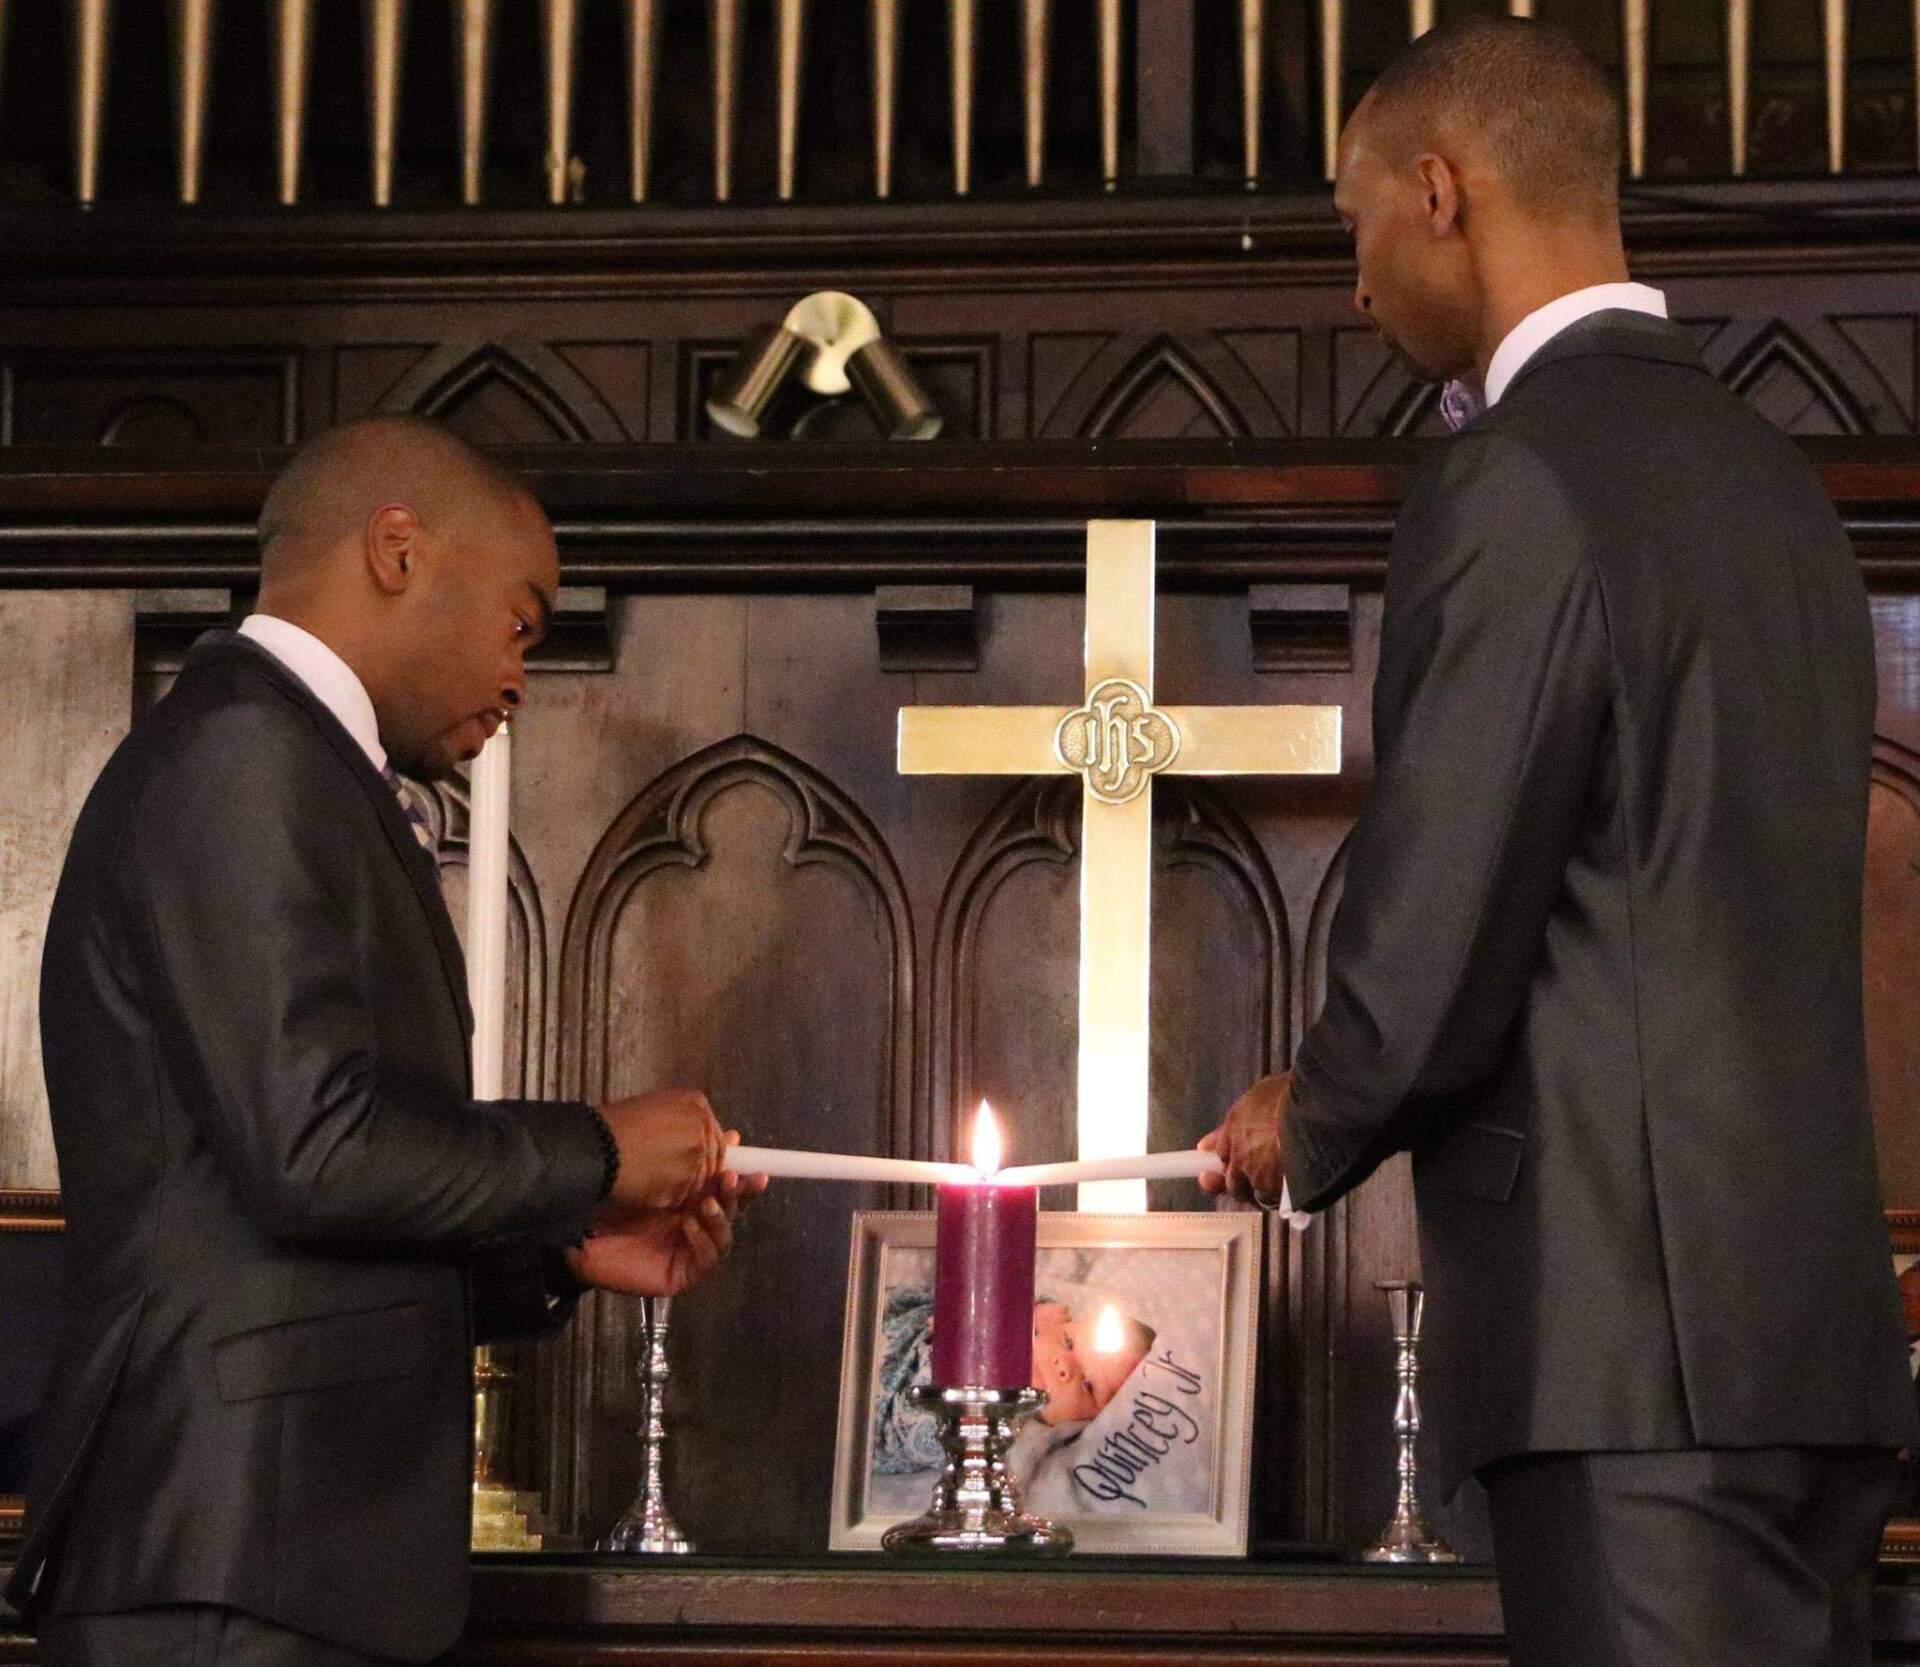 Quincy J. Roberts Sr. and Corey Yarbrough during their wedding ceremony in 2016. (Courtesy of the couple)